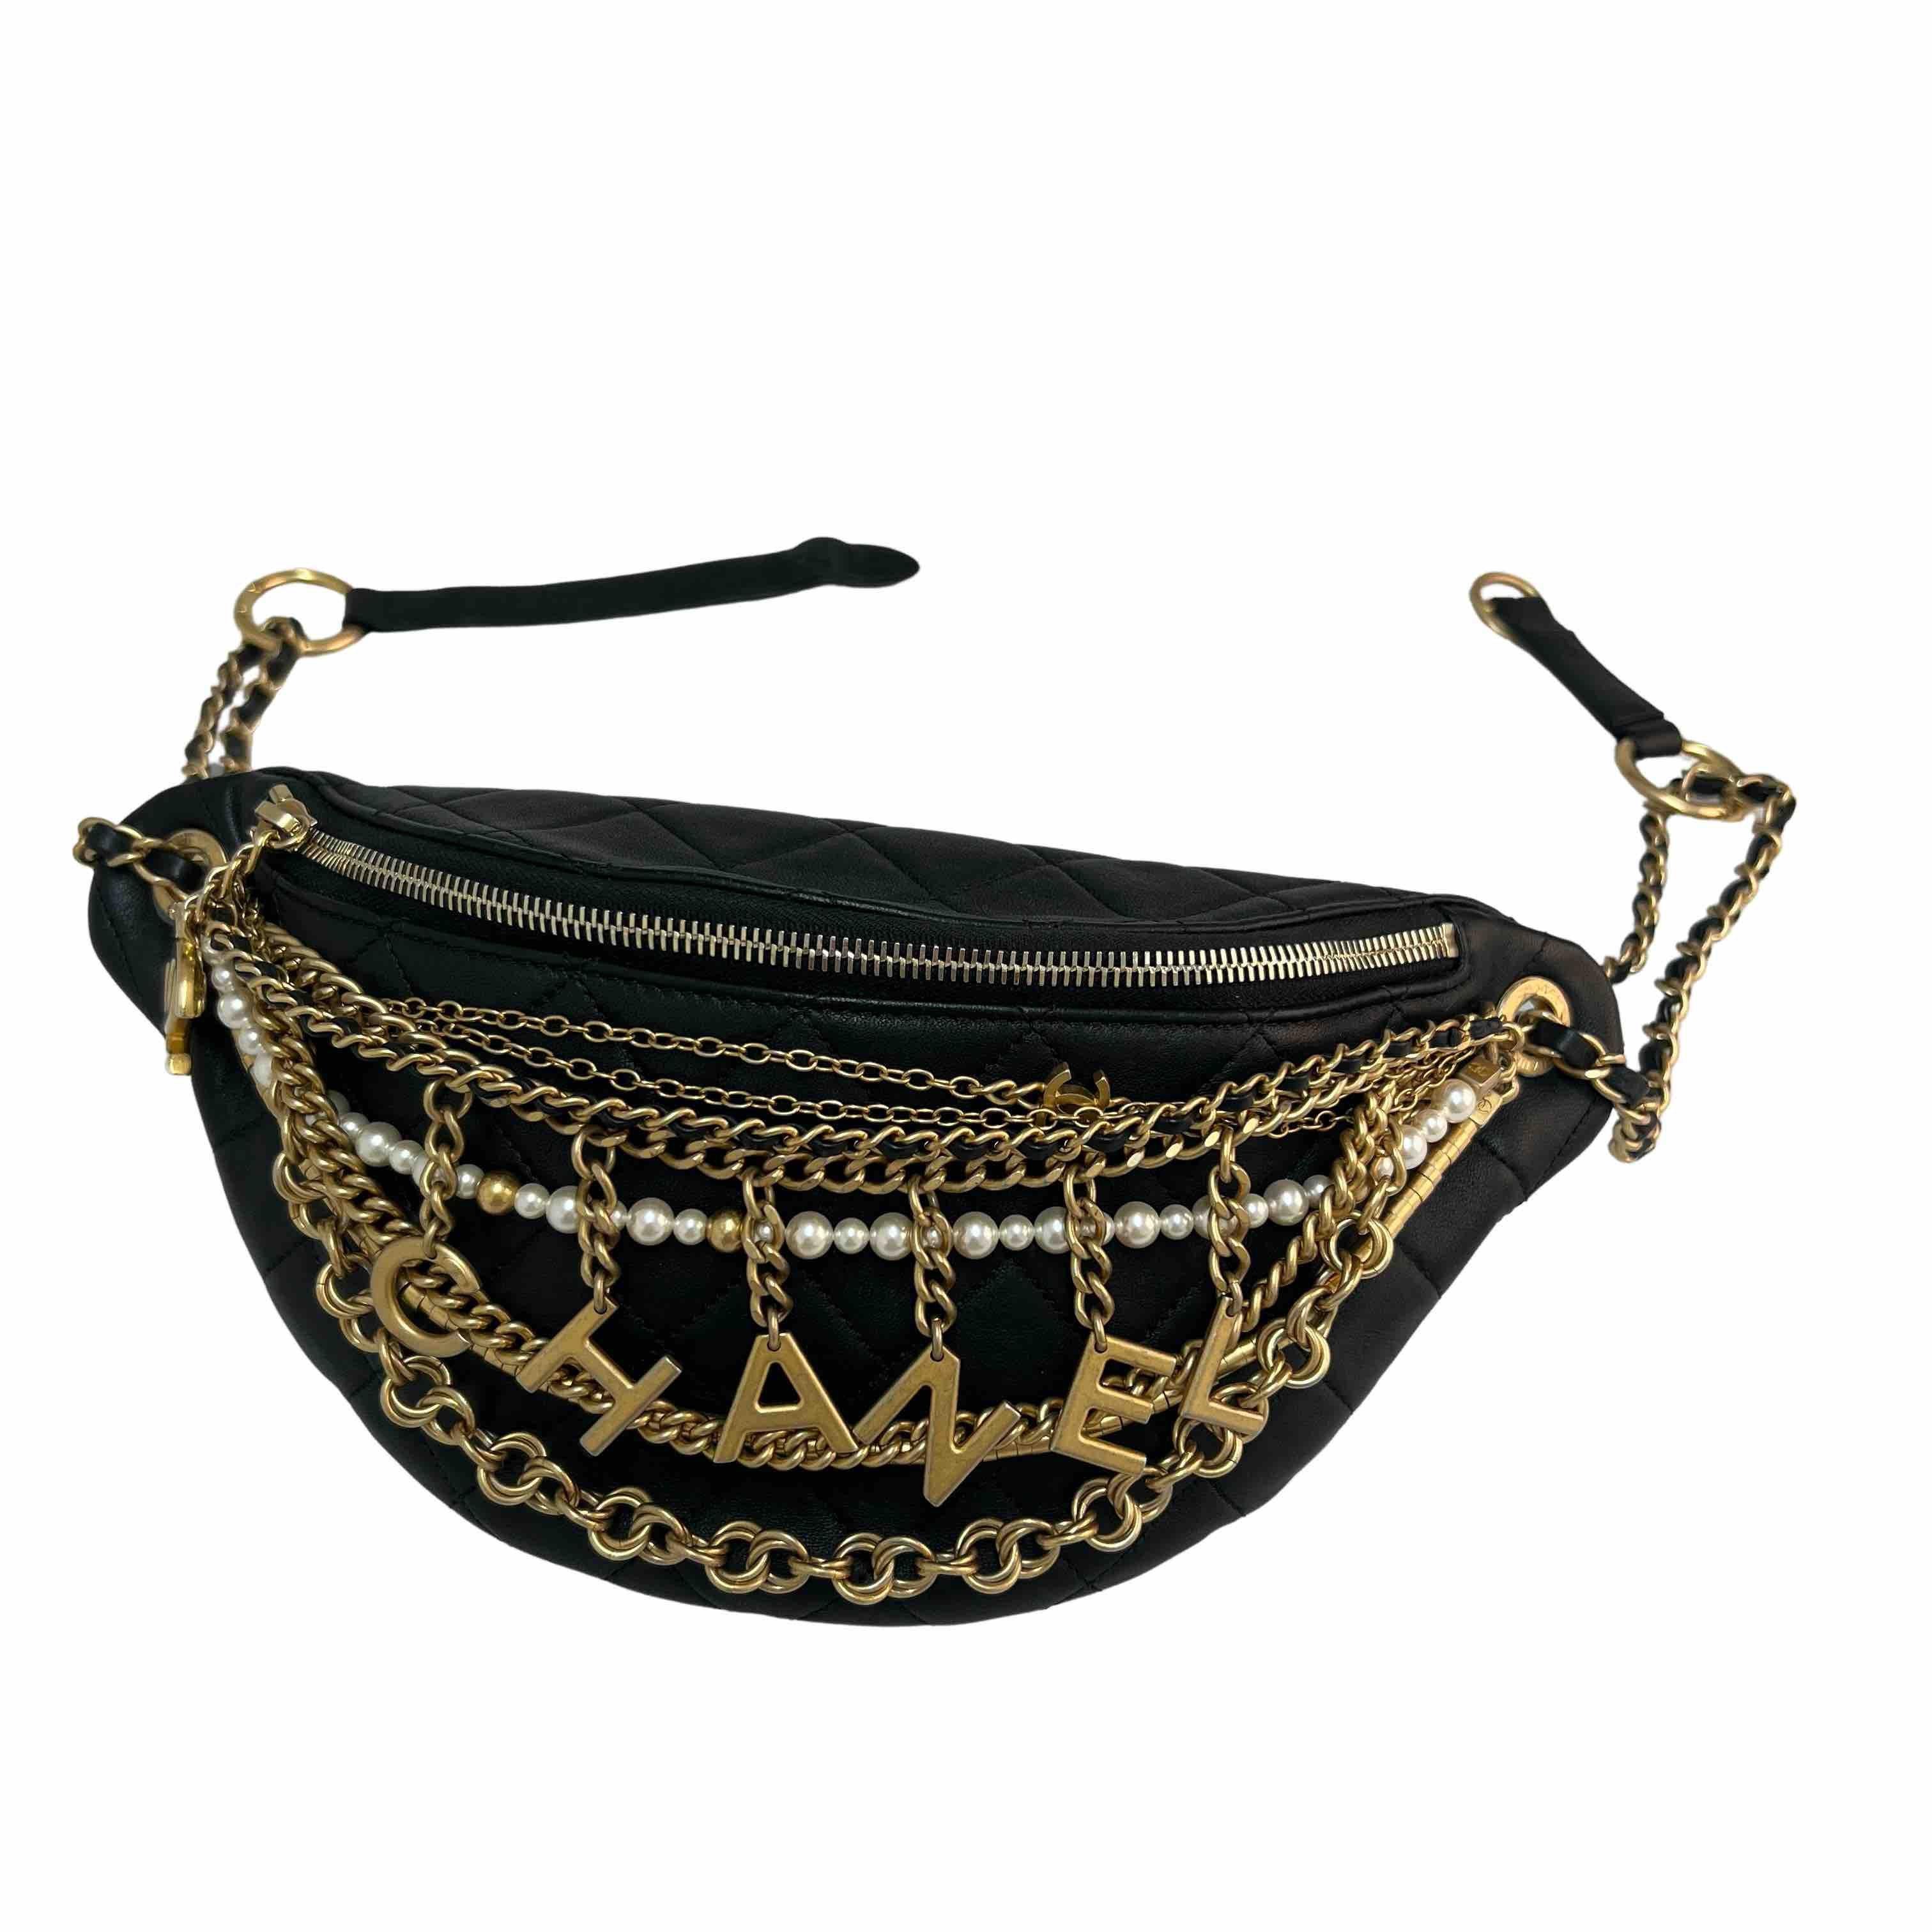 Black CHANEL banana belt bag in black quilted lamb leather, gilt metal chains and pearls chains. Belt worn.
The lining is in golden leather. One zip pocket.
In very good condition.
Made in Italy.
Size: 35 x 13.5 x 7cm
Belt: minimum 88 cm, maximum